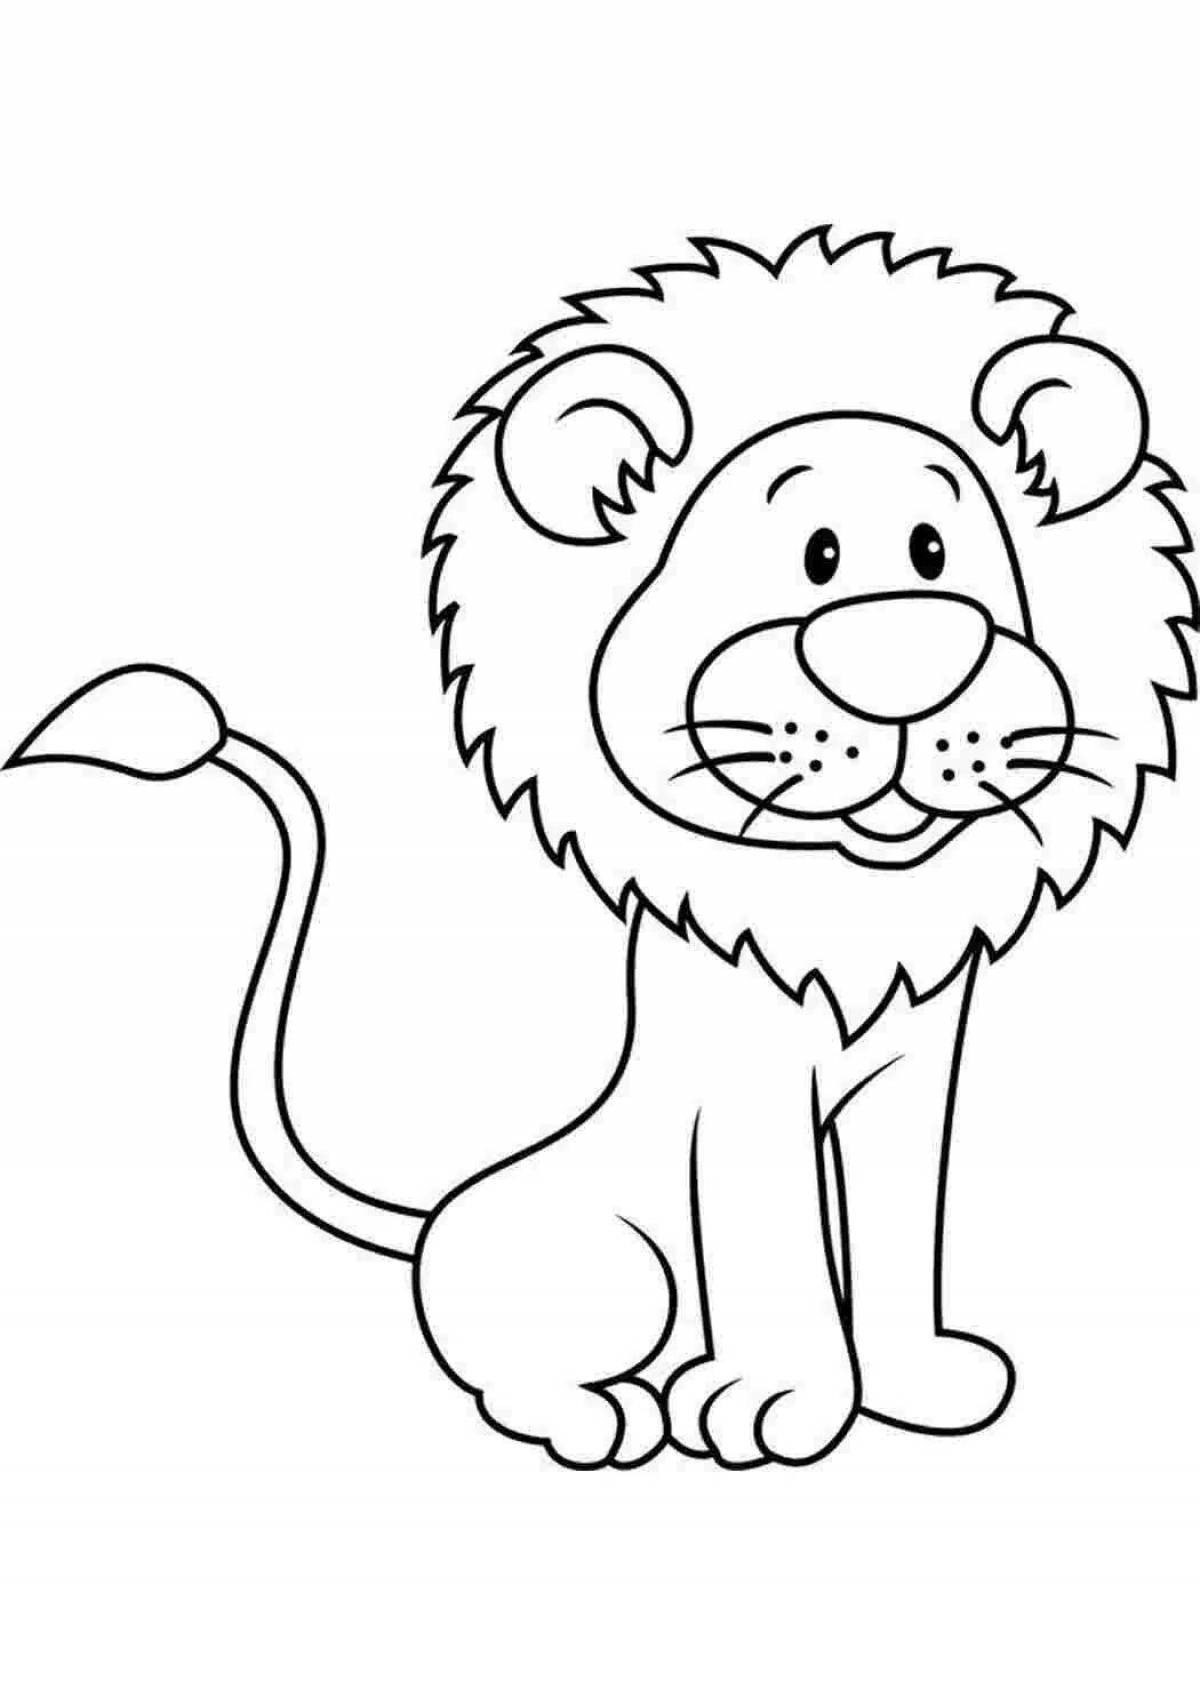 Intriguing lion coloring page